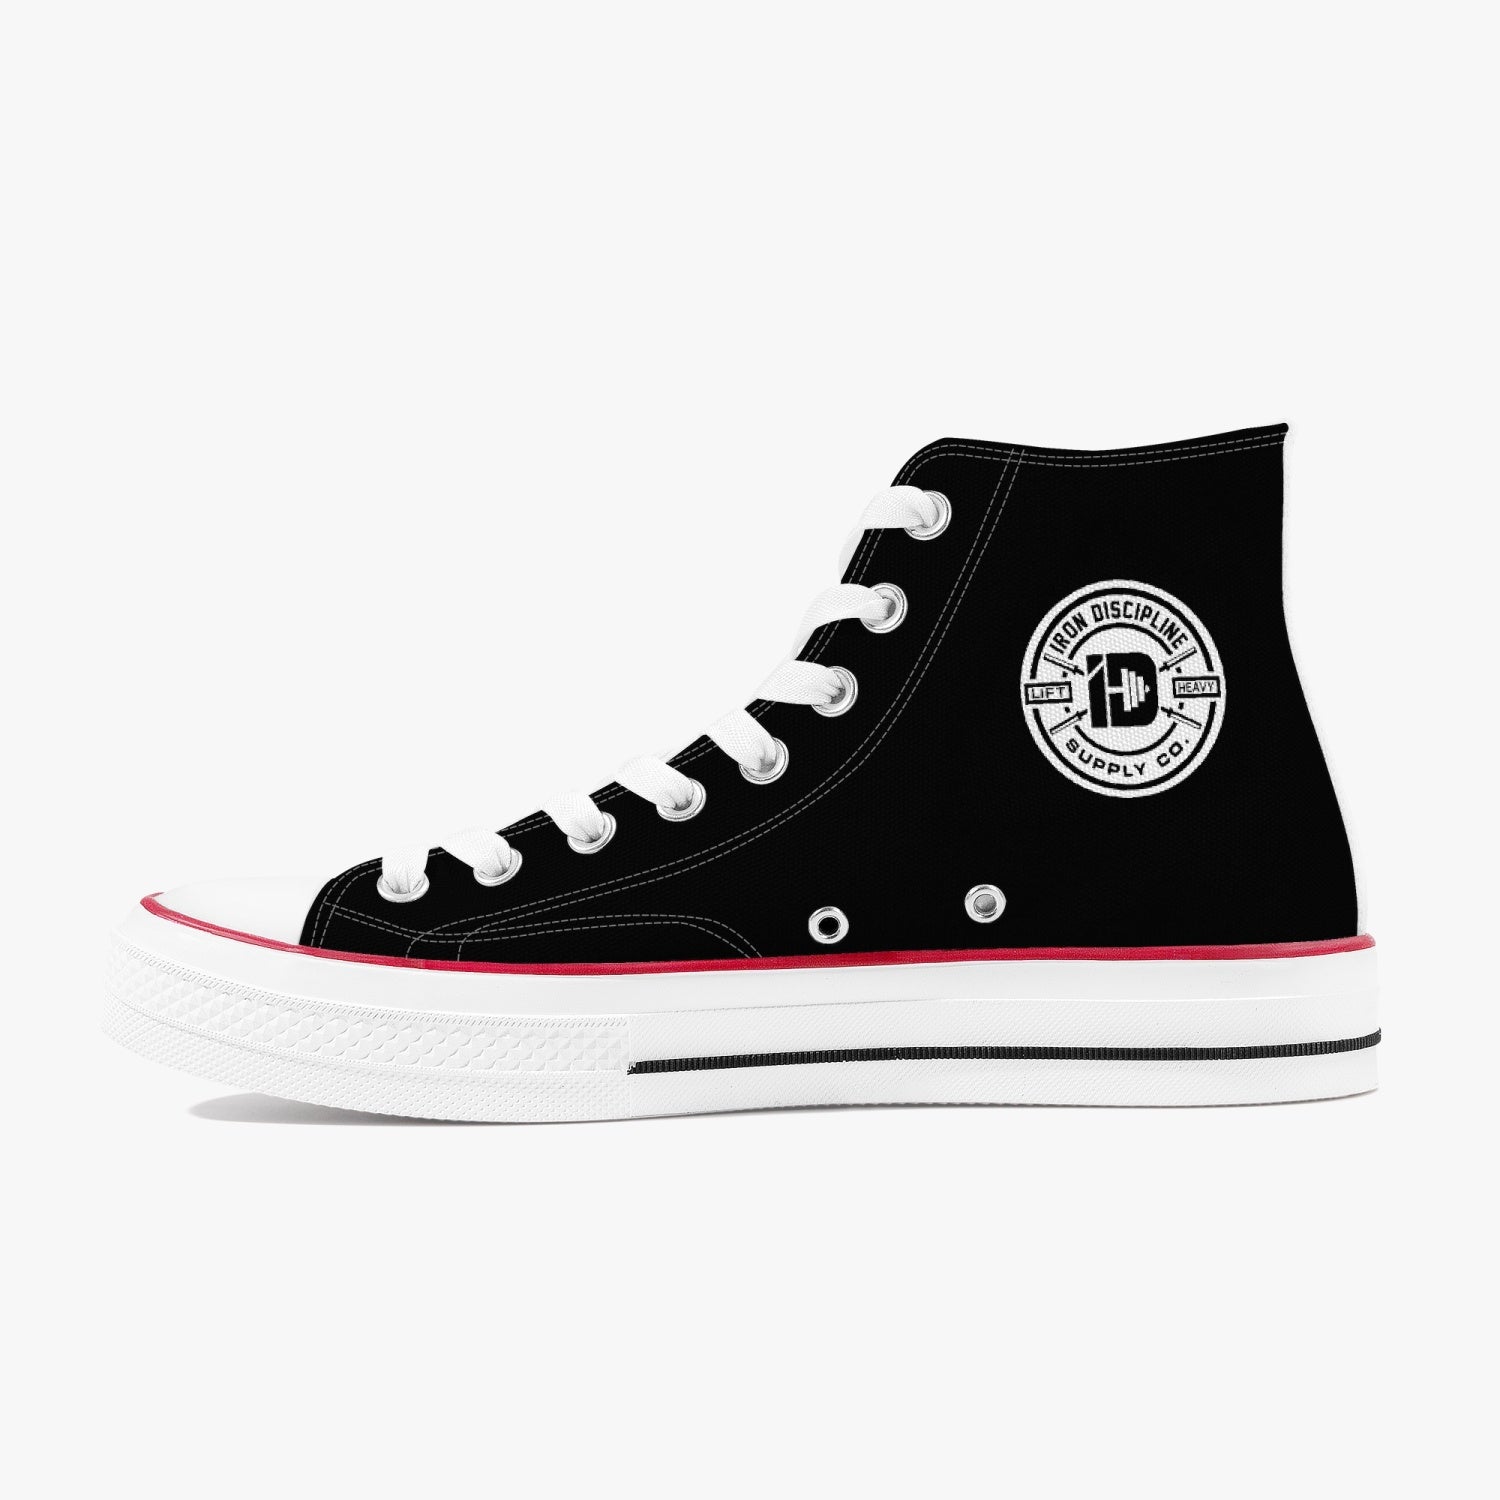 Classic 1970s ID High-Top Sneakers (Unisex)